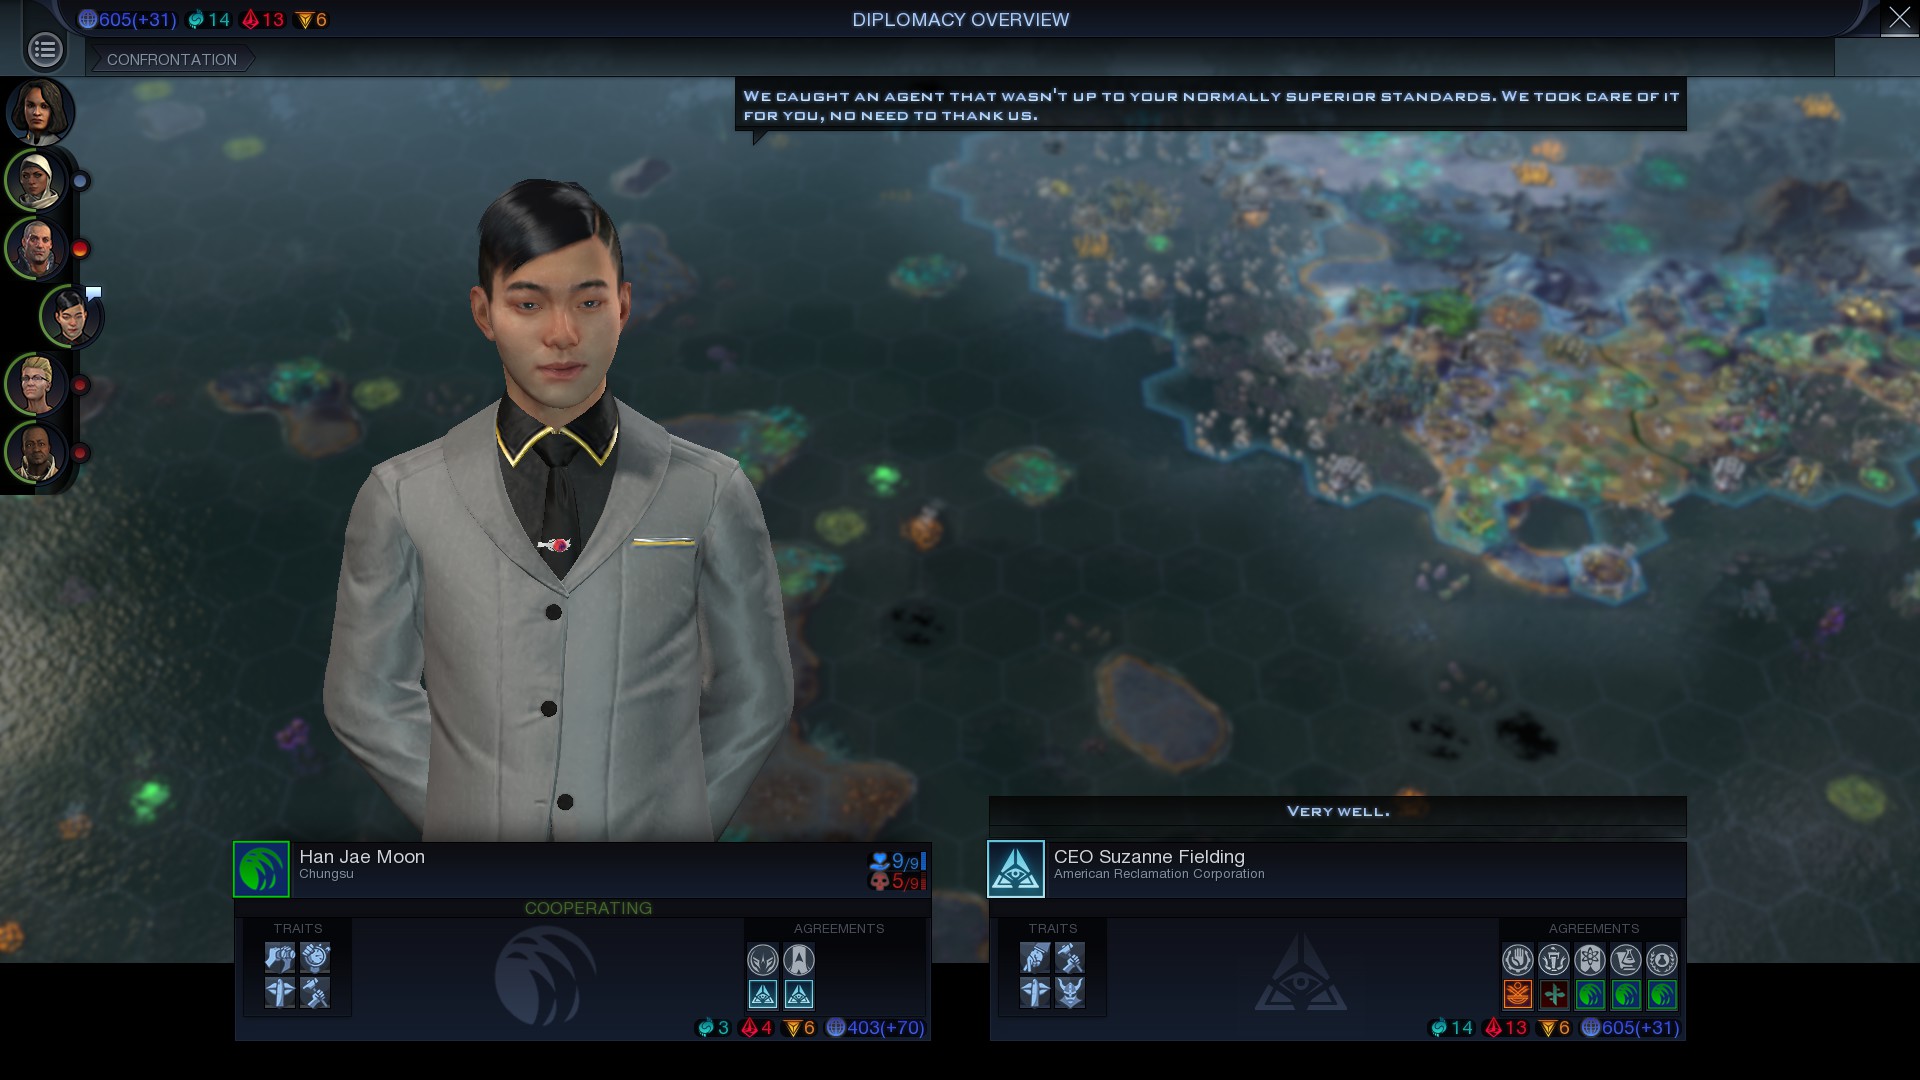 civilization beyond earth rising tide download free